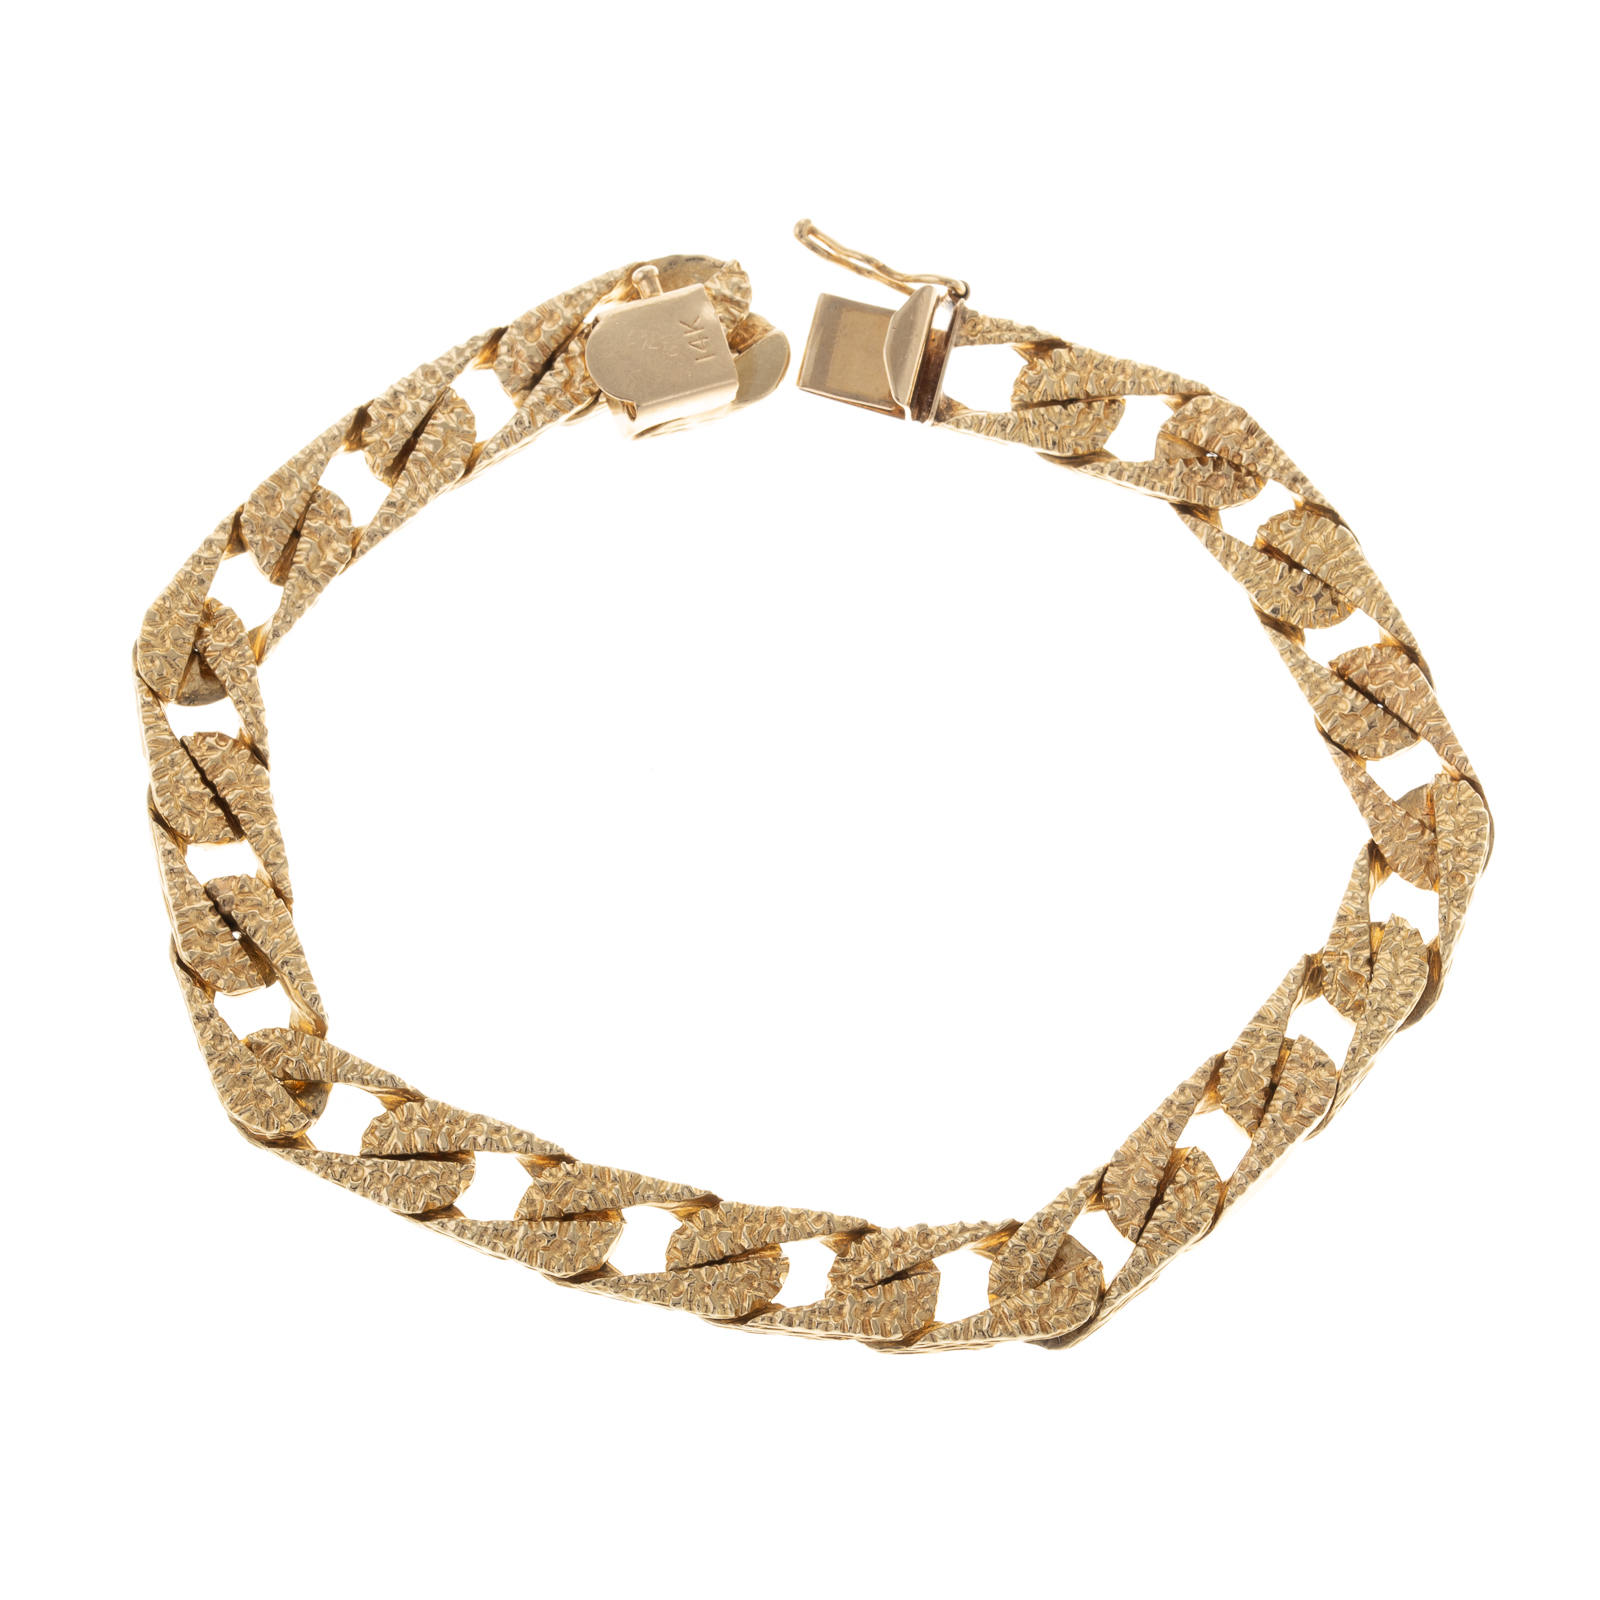 A TEXTURED CURB LINK BRACELET IN